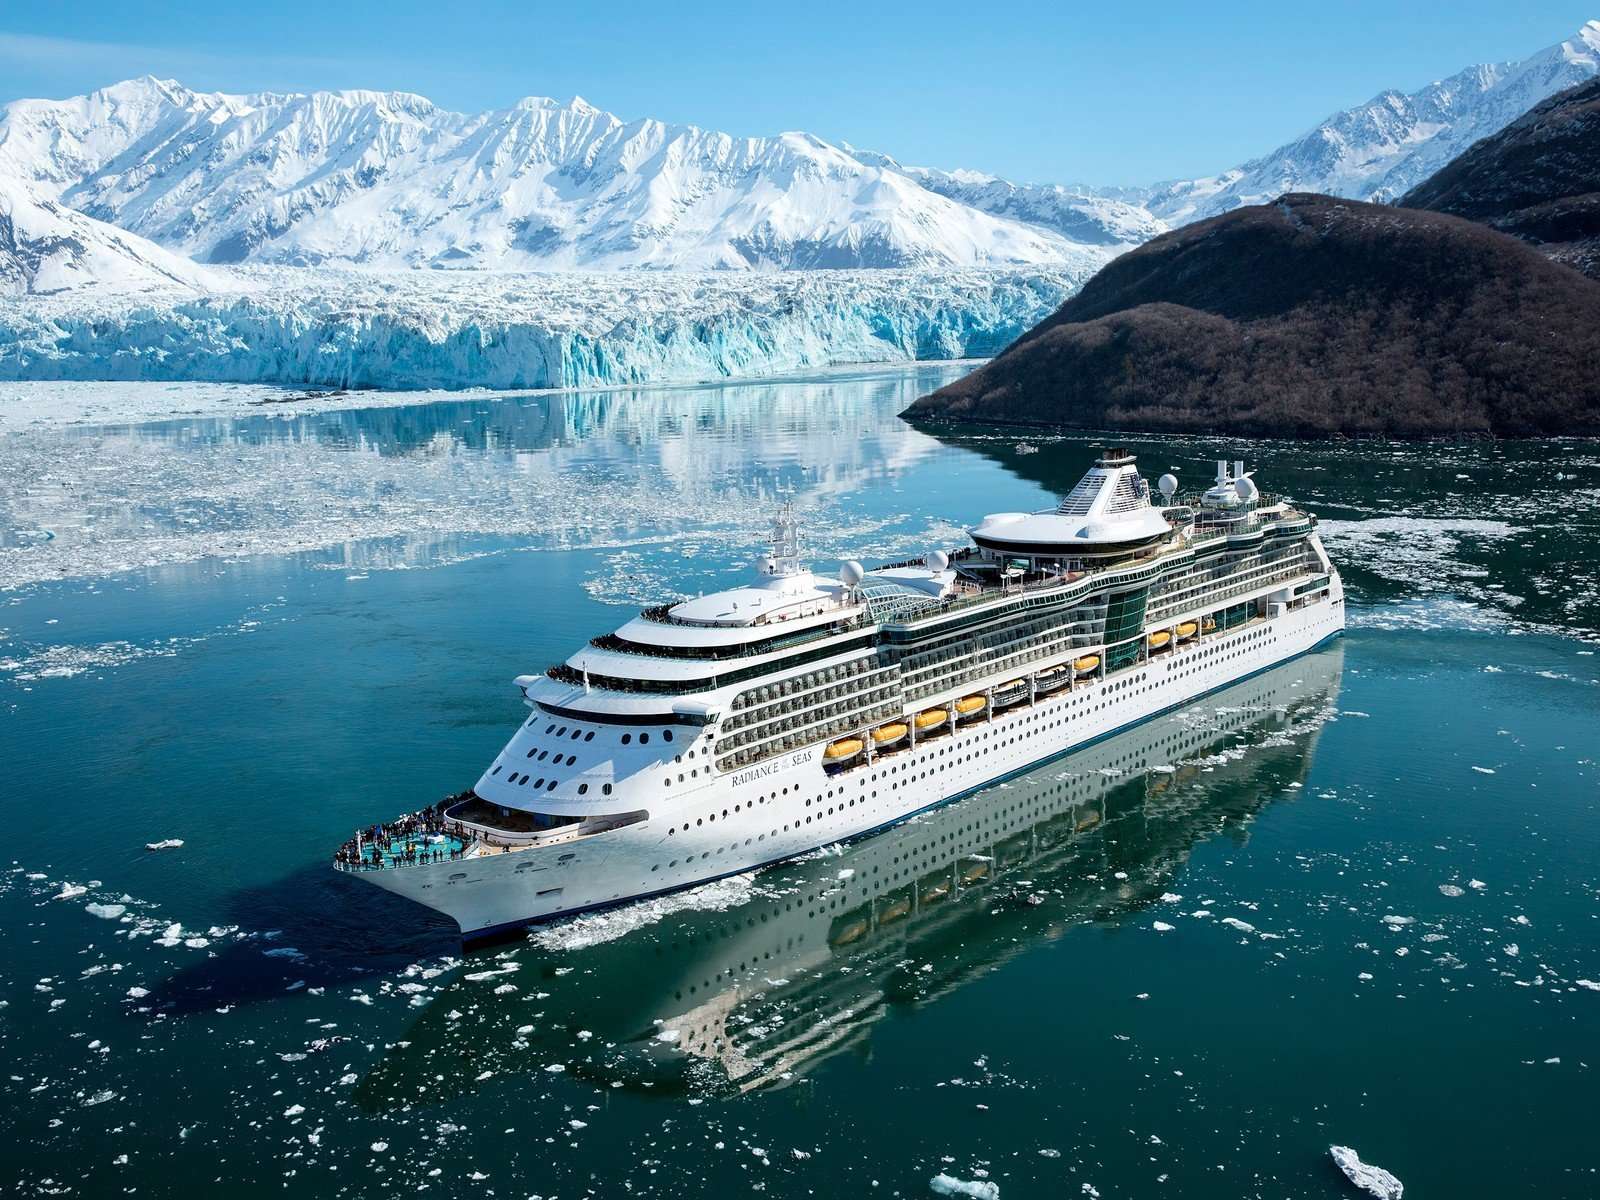 The best time to take an Alaska cruise